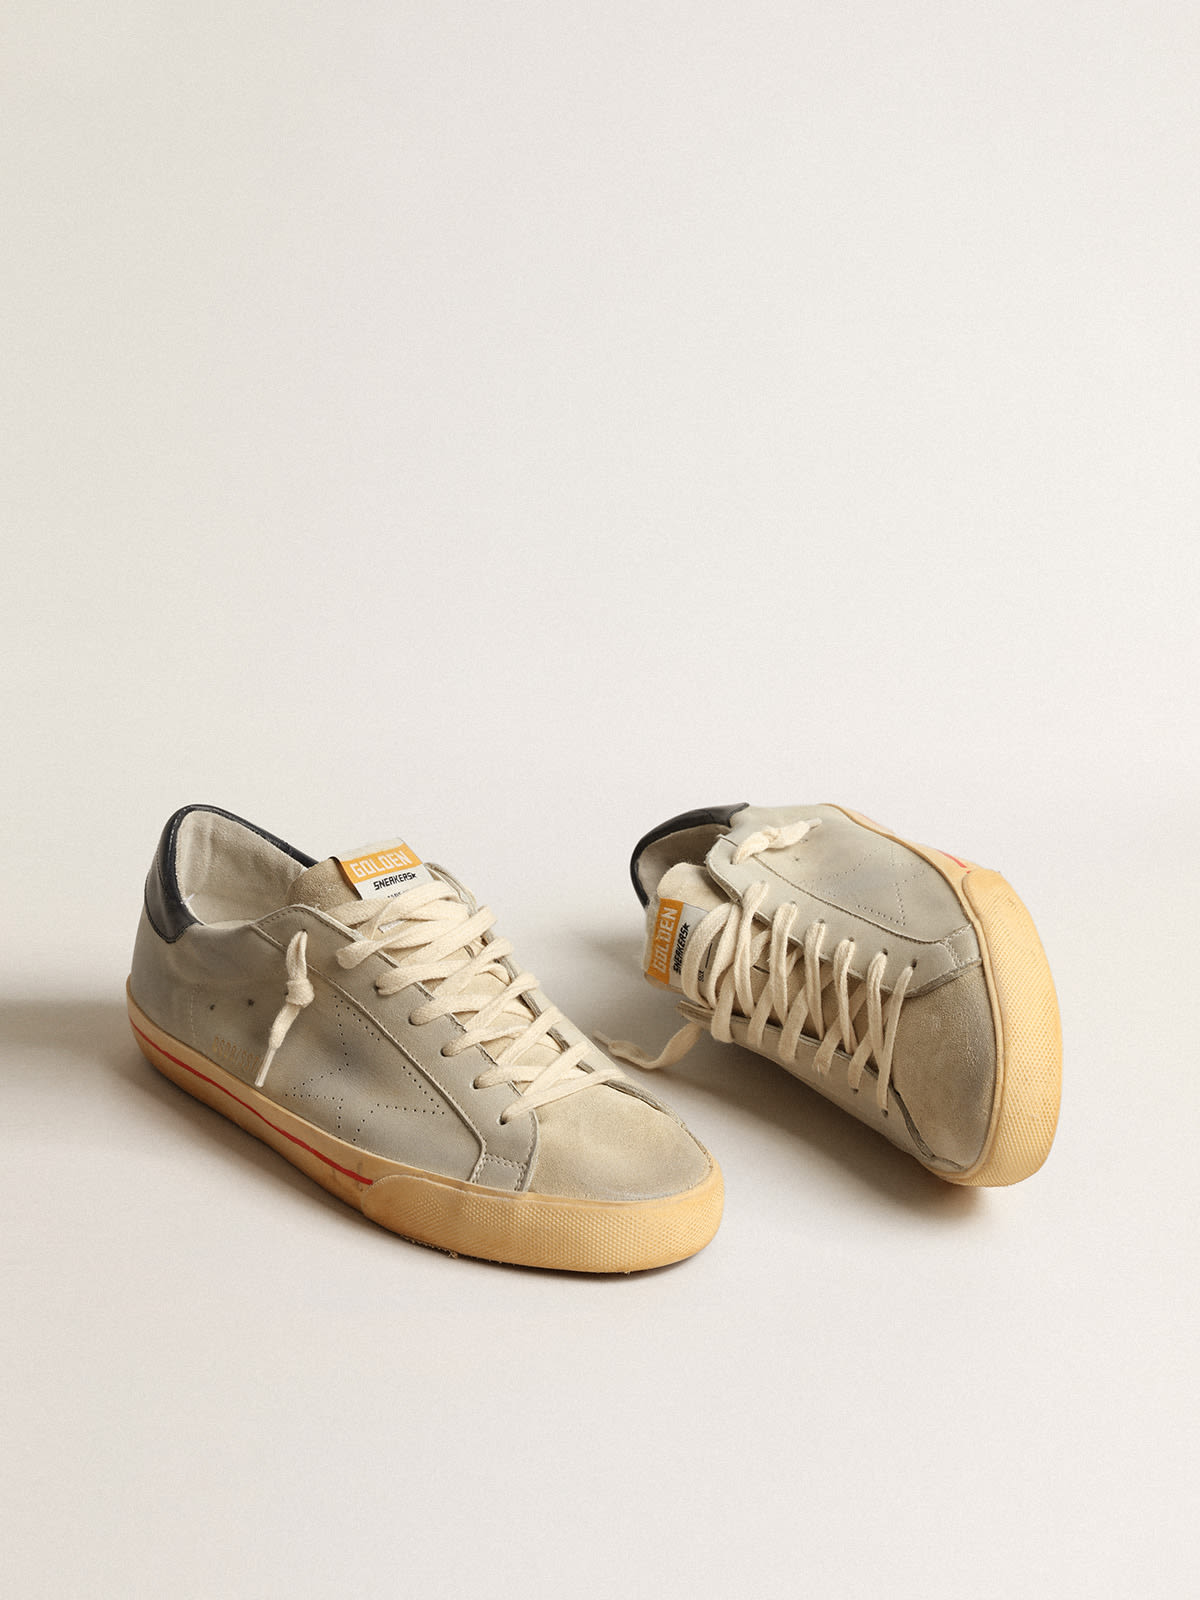 Golden Goose - Super-Star in gray nubuck with perforated star and blue heel tab in 